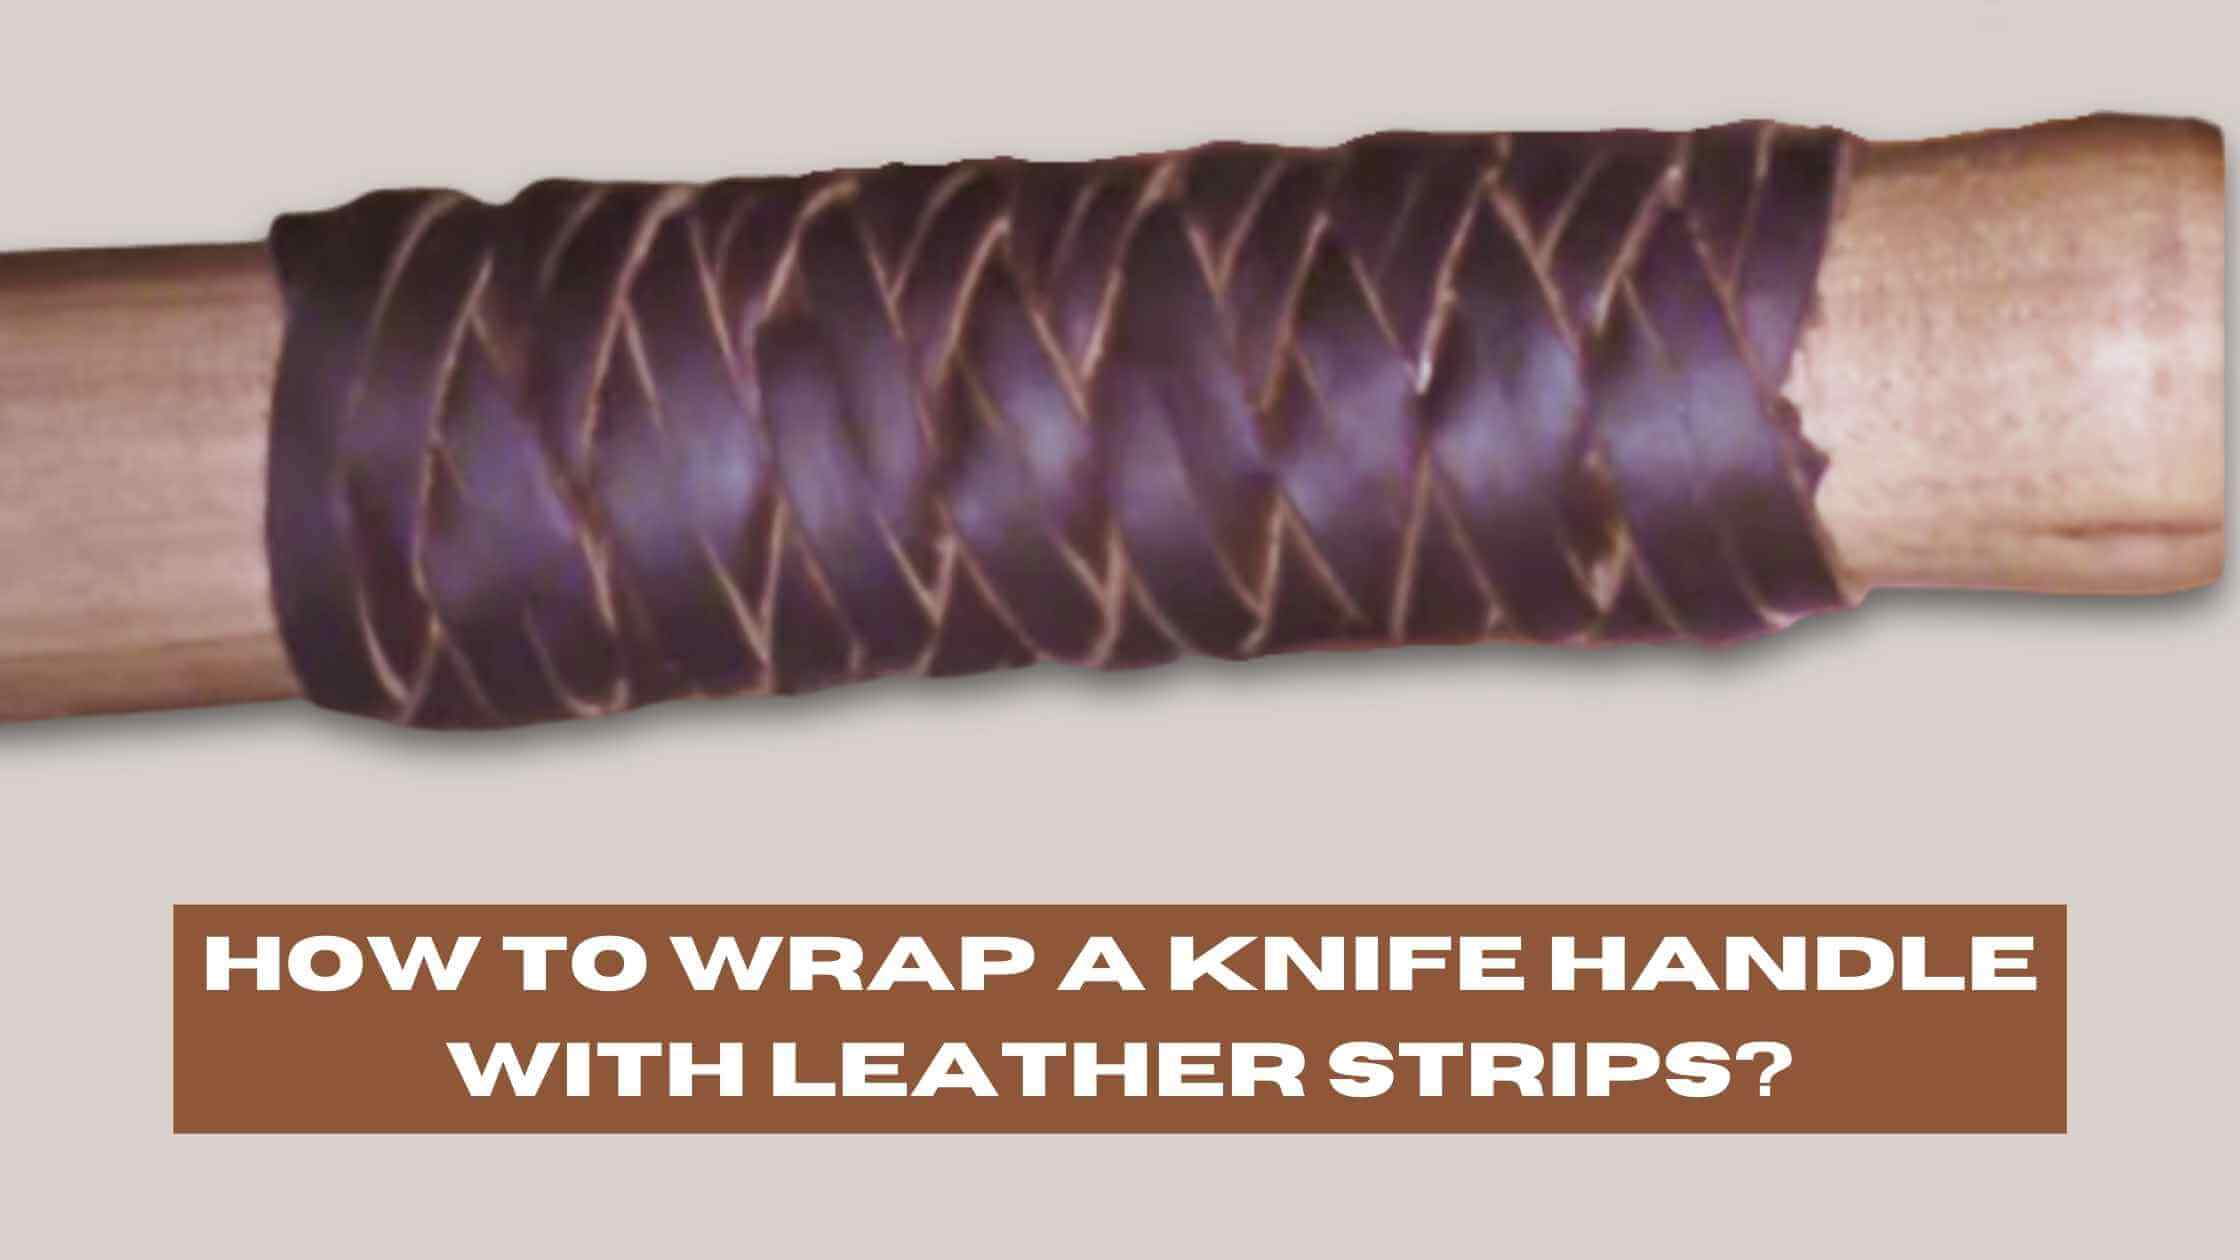 How to Wrap a Knife Handle with Leather Strips